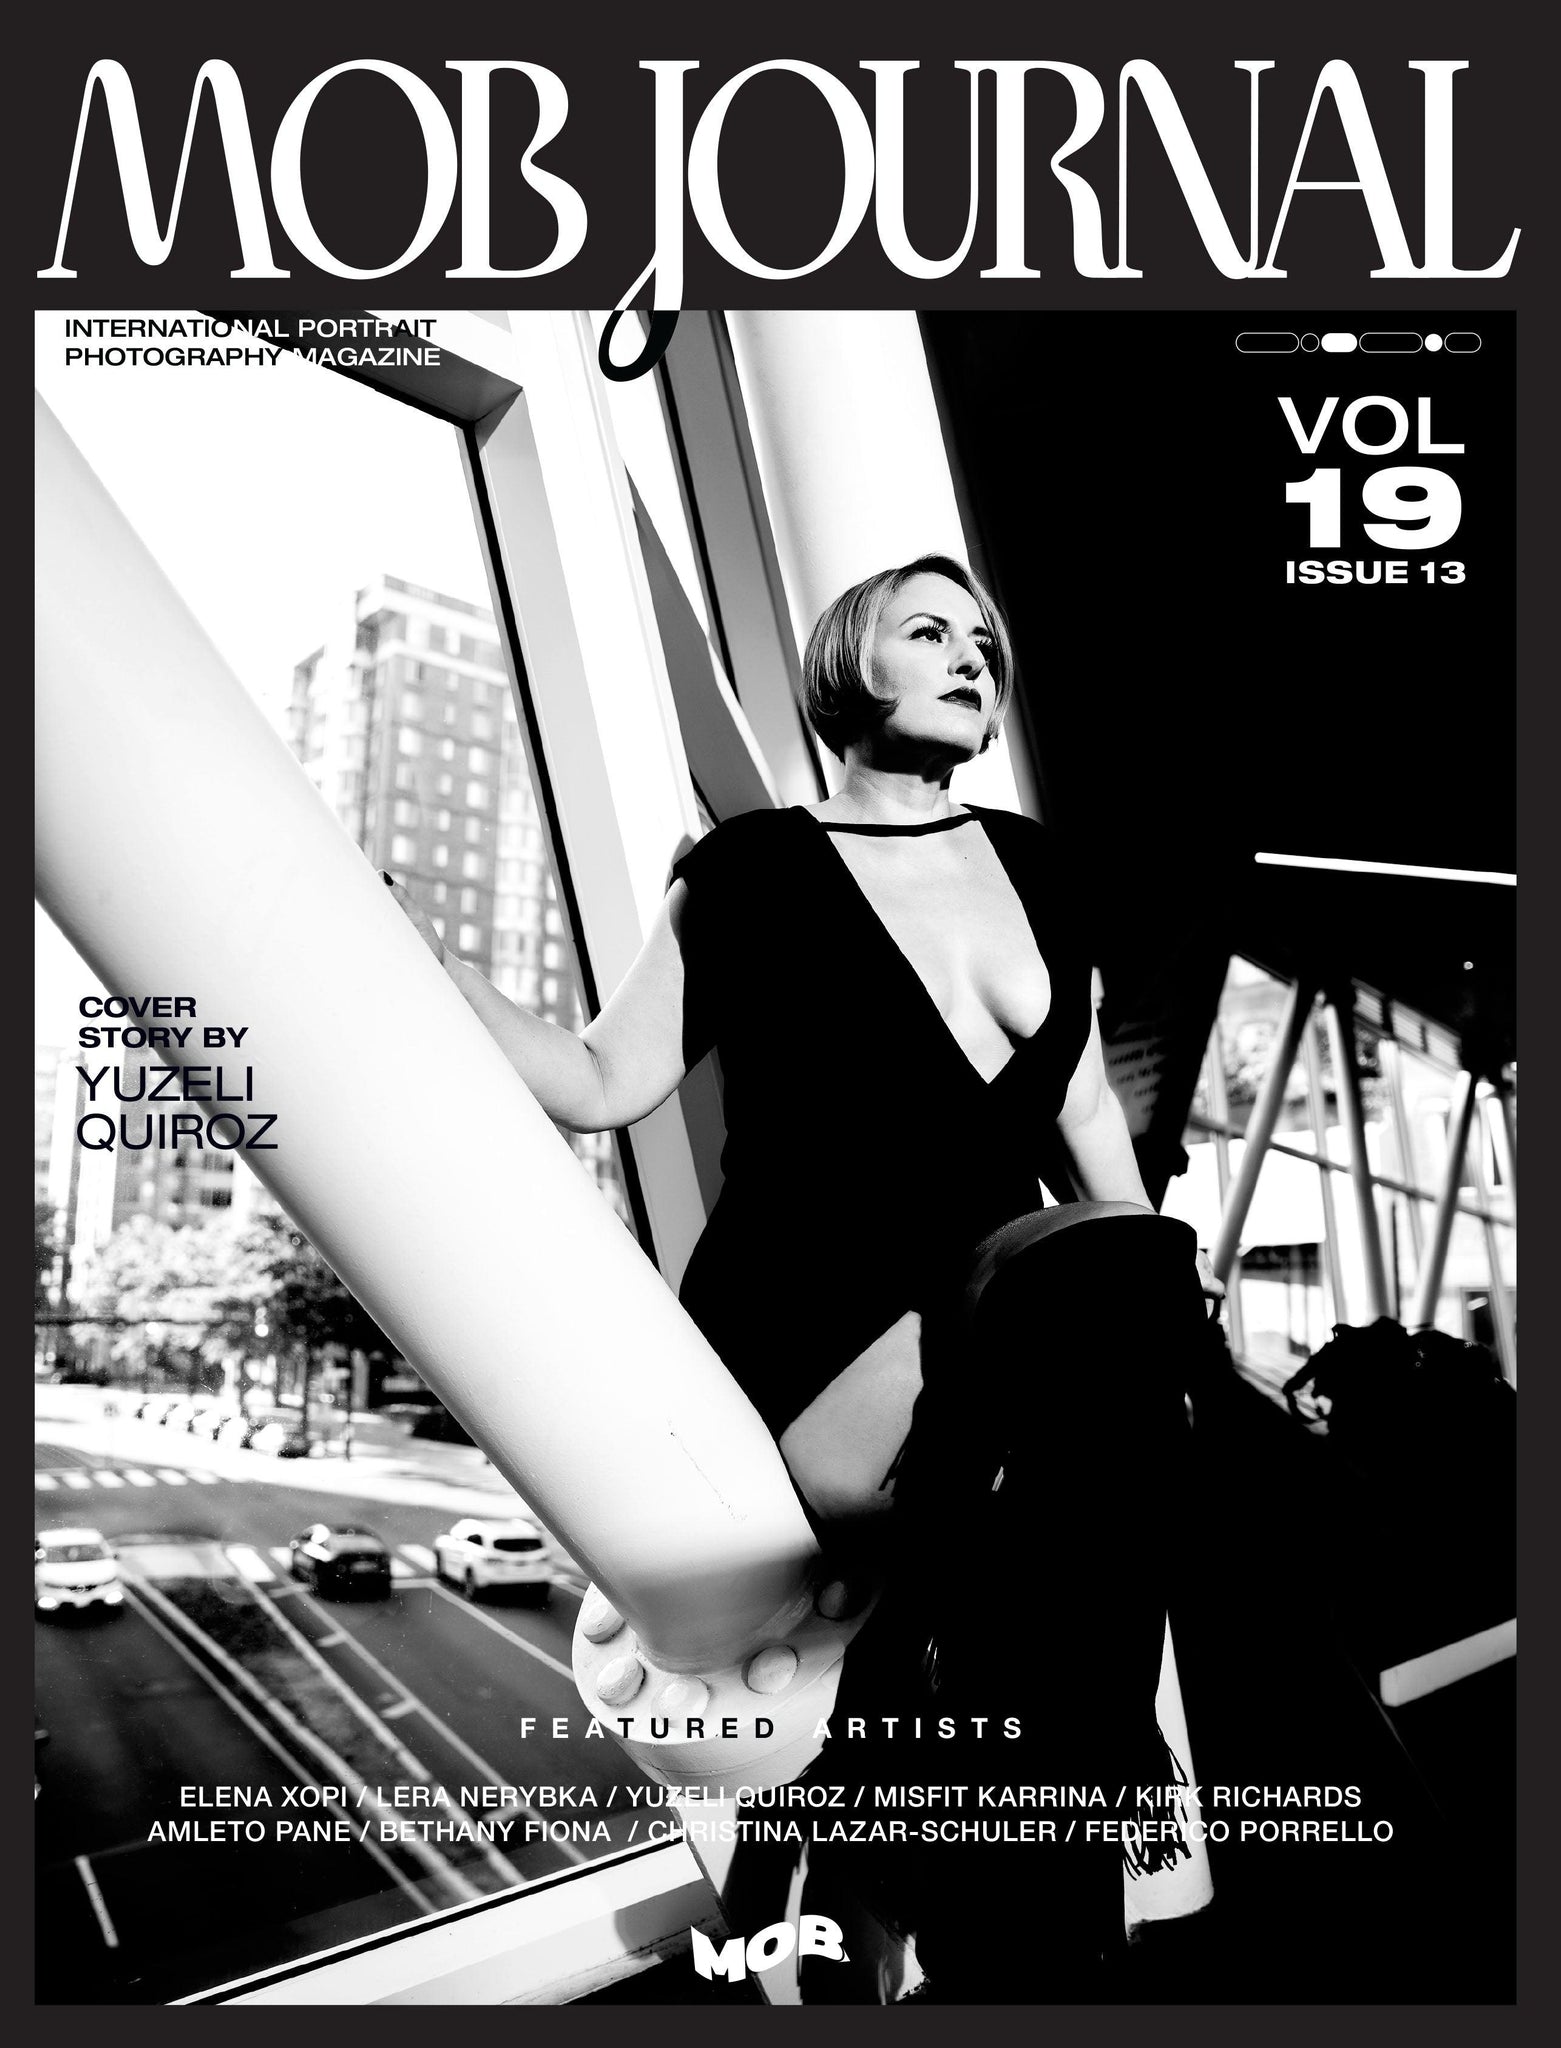 MOB JOURNAL | VOLUME NINETEEN | ISSUE #13 - Mob Journal